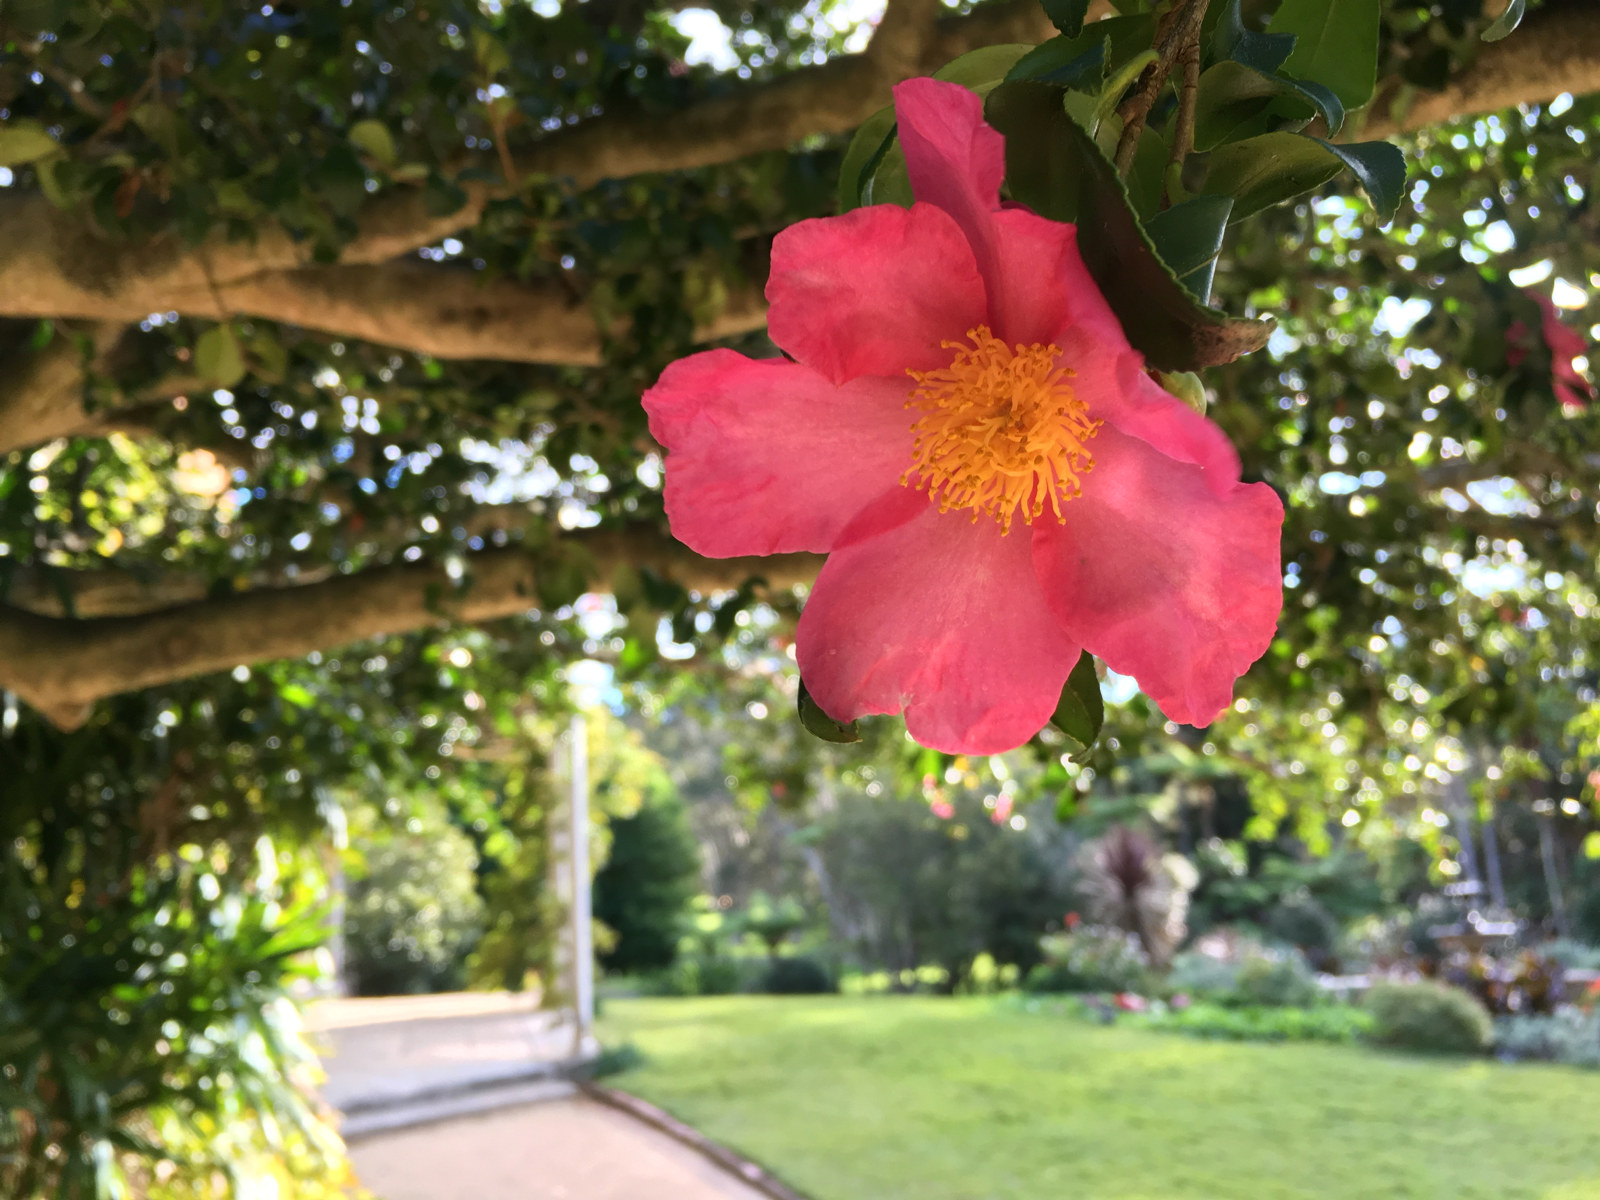 Camellia sasanqua 'Rosea' - the mild pink Camellia with its contrasting yellow stamens at Vaucluse House